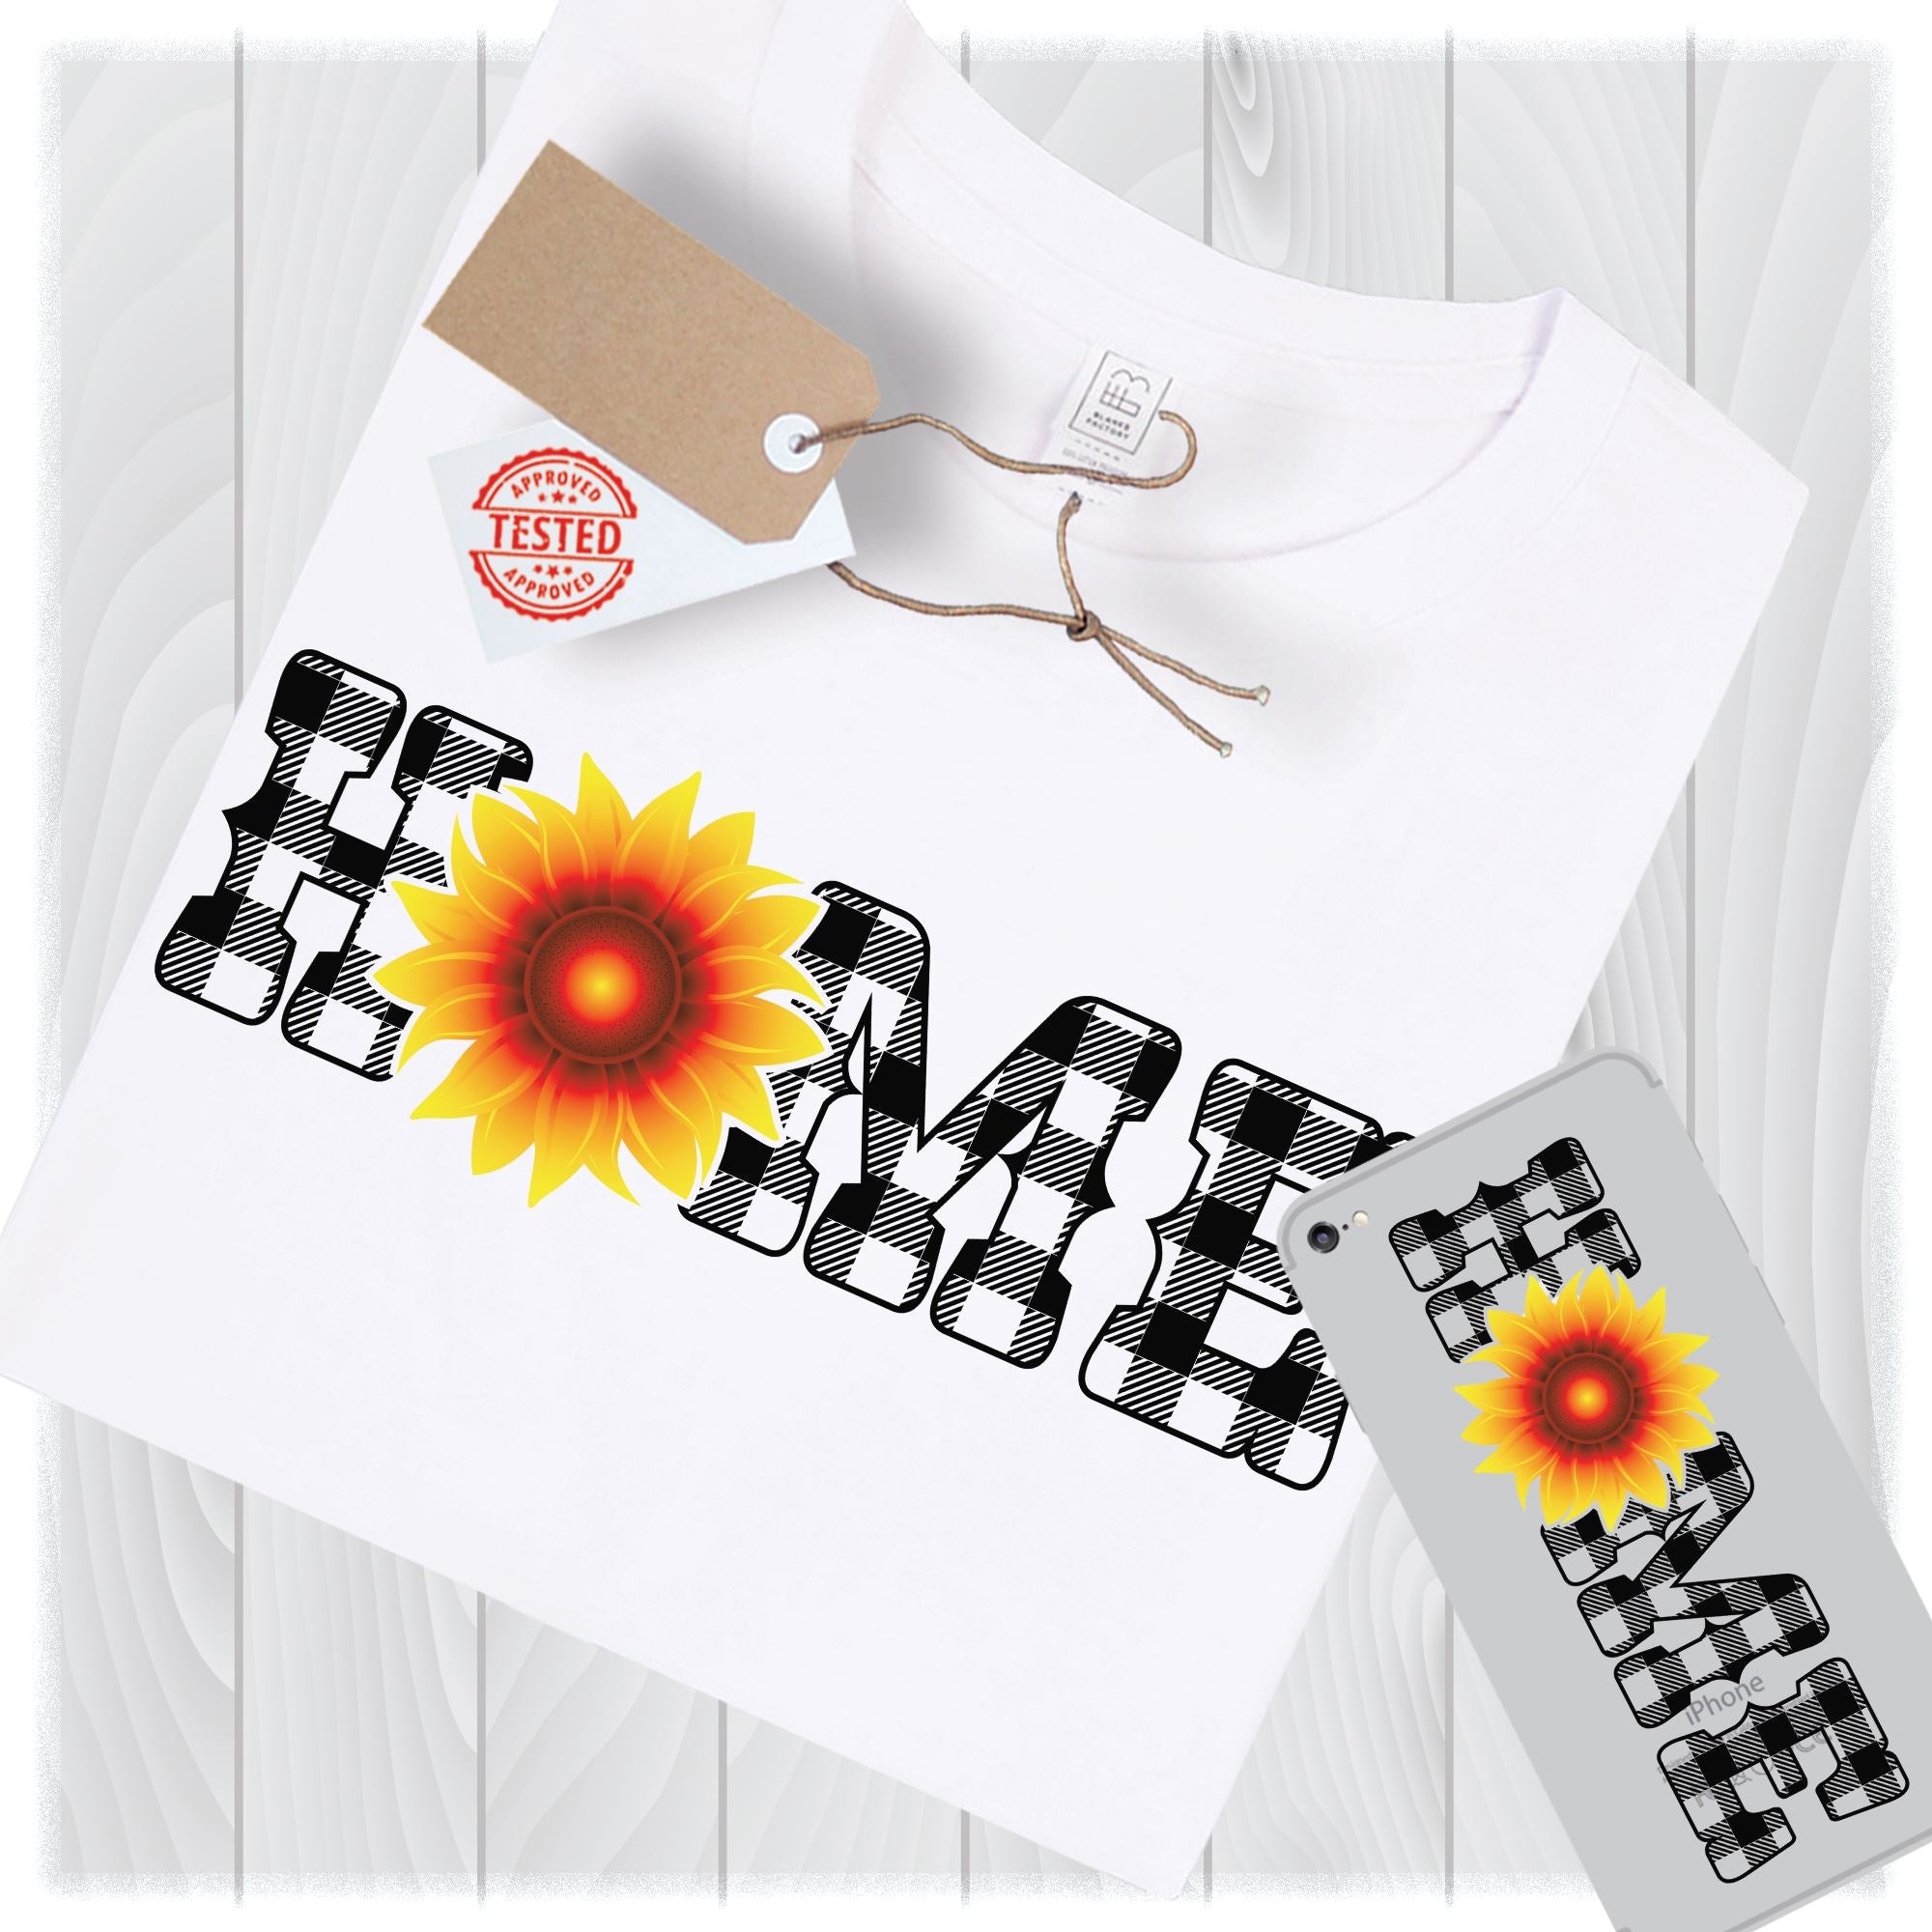 Download Home Sunflower Svg Files For Cricut Designs Svg Sunflower Svg Cut File Sunflower Clipart Sunflower Png Sunflower Clip Art Home Svg So Fontsy